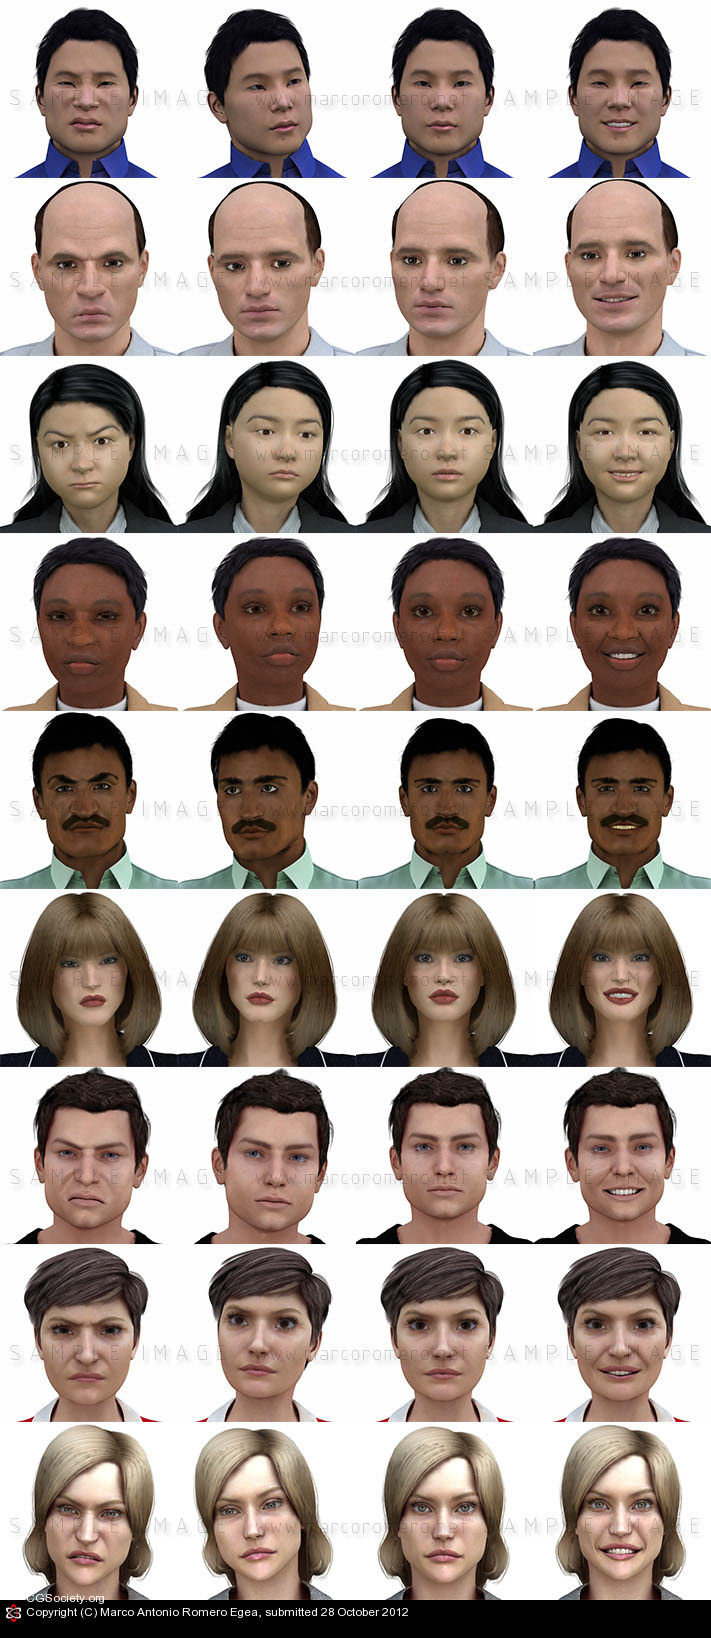 female male characters expressions lip sync anatomy avatar virtual Education actor spokesperson game Poser